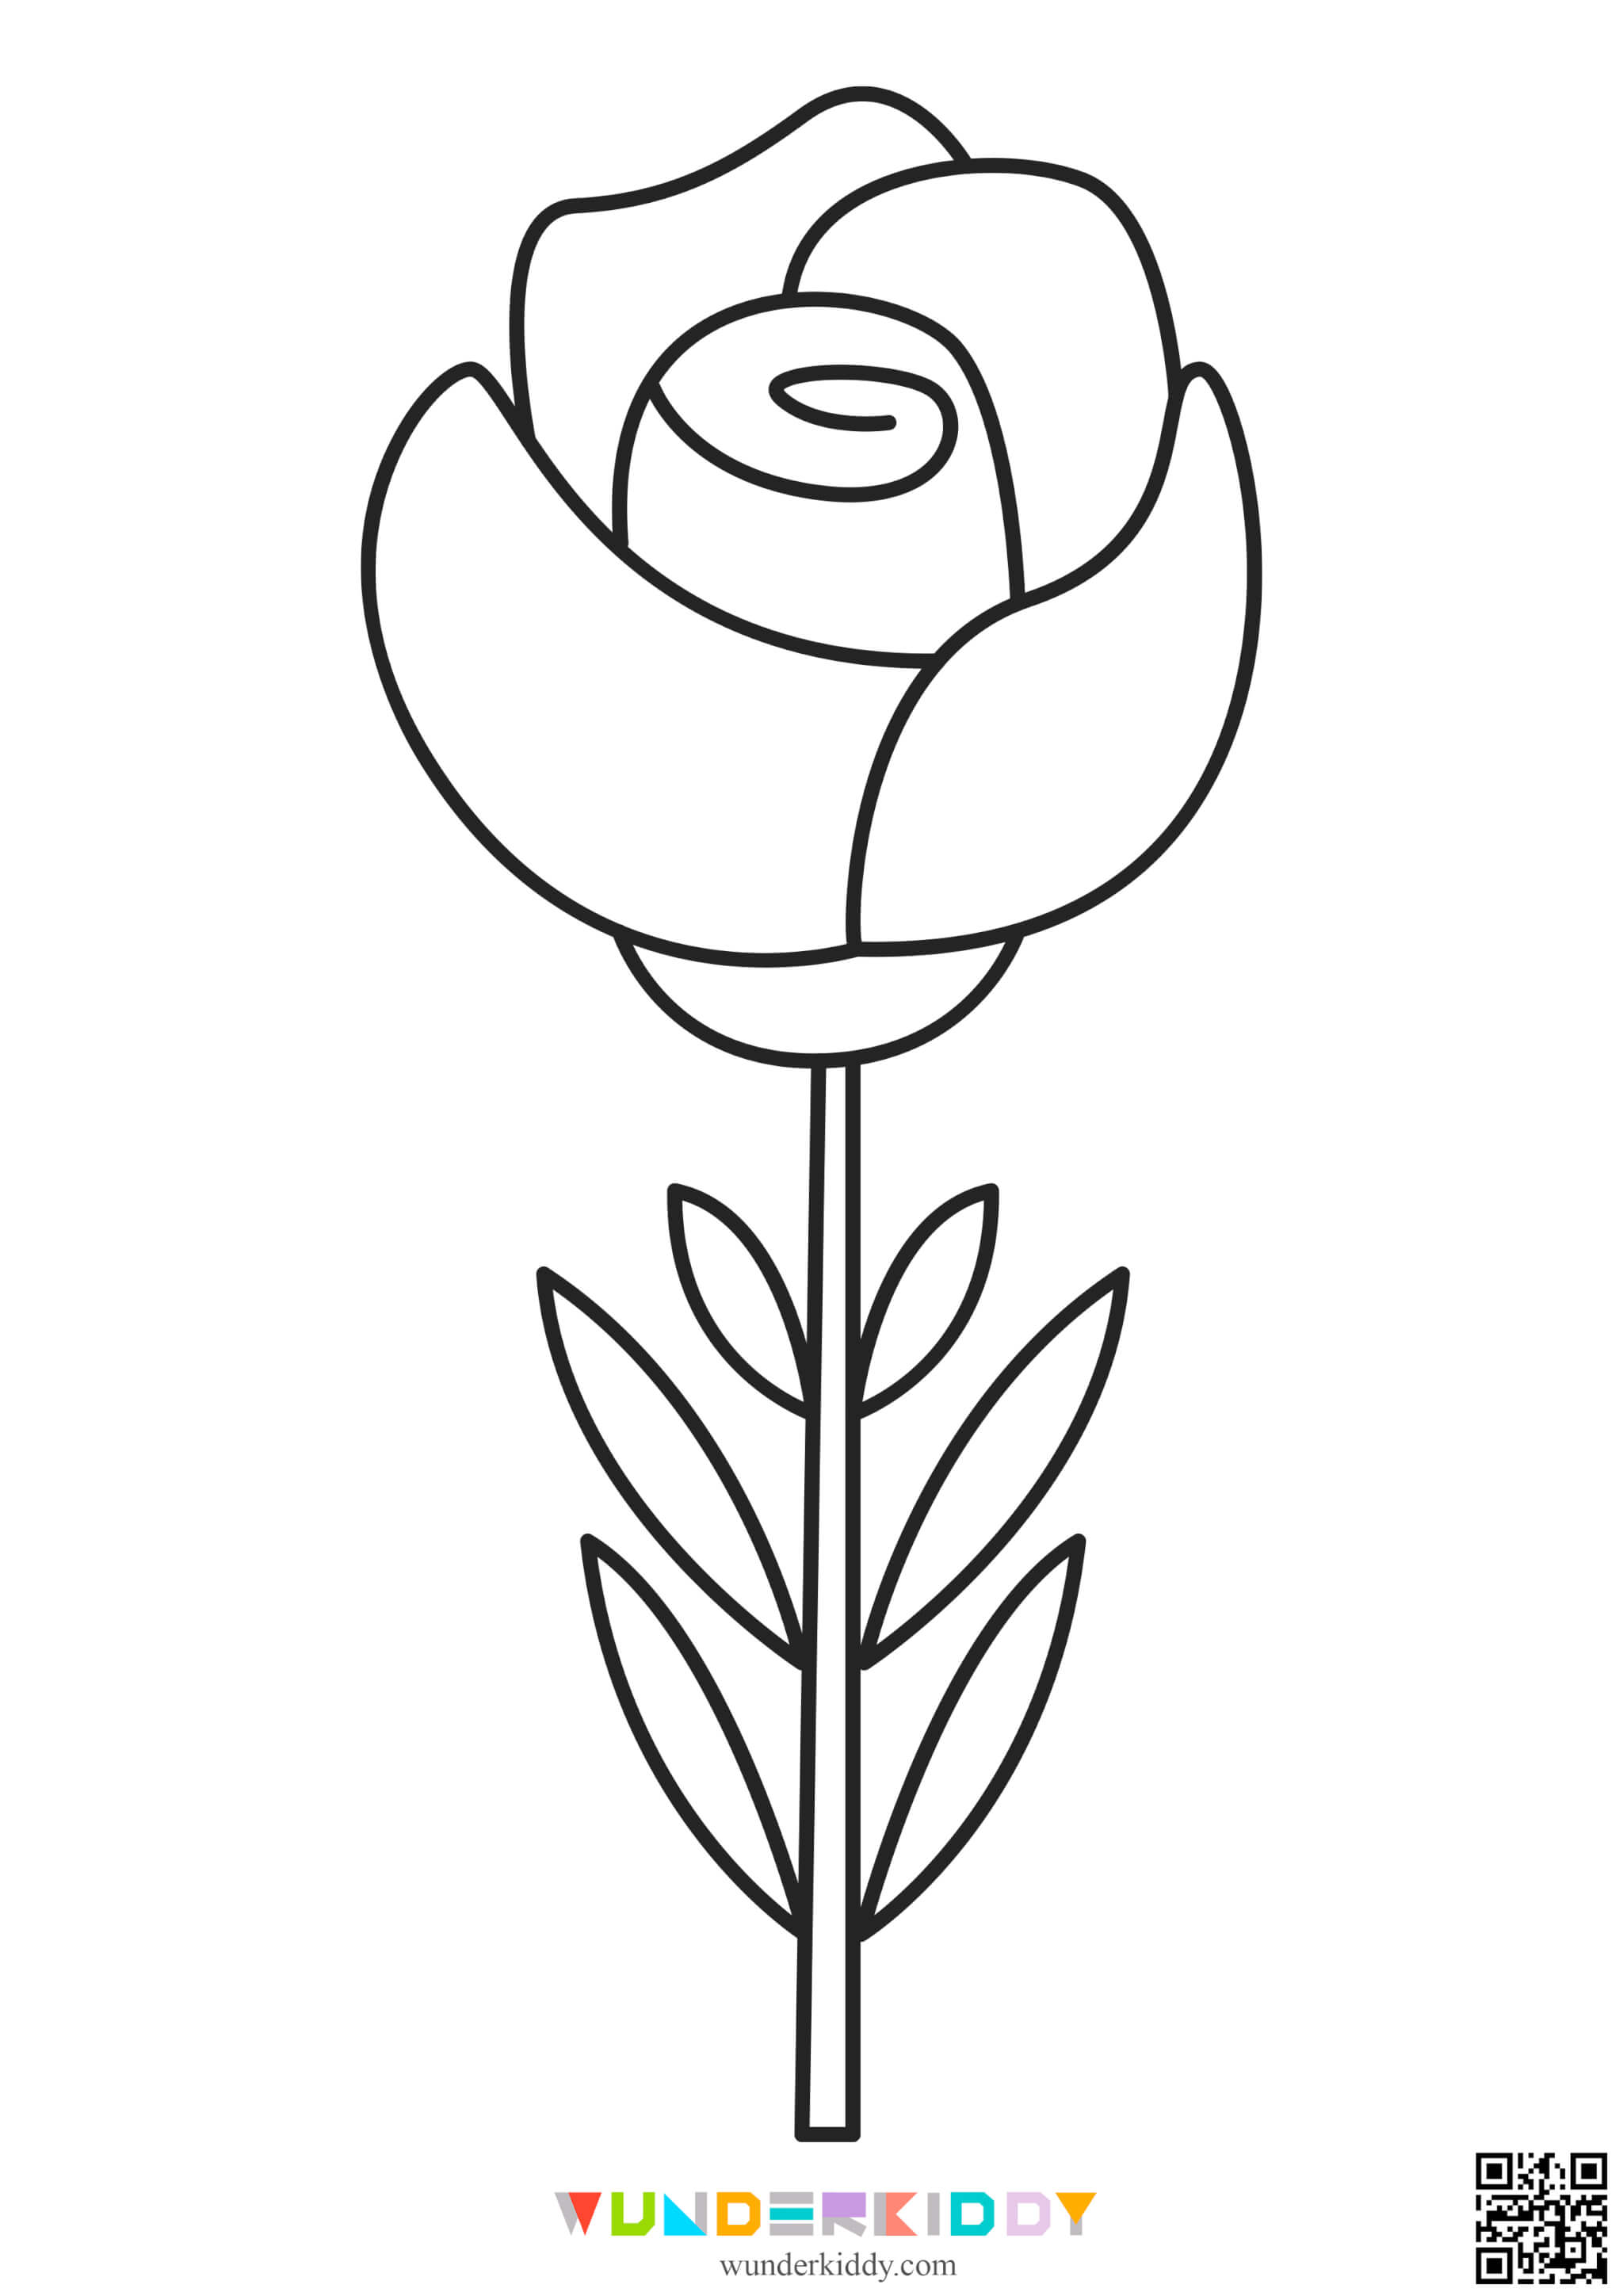 Flower Printable Coloring Pages - Image 9